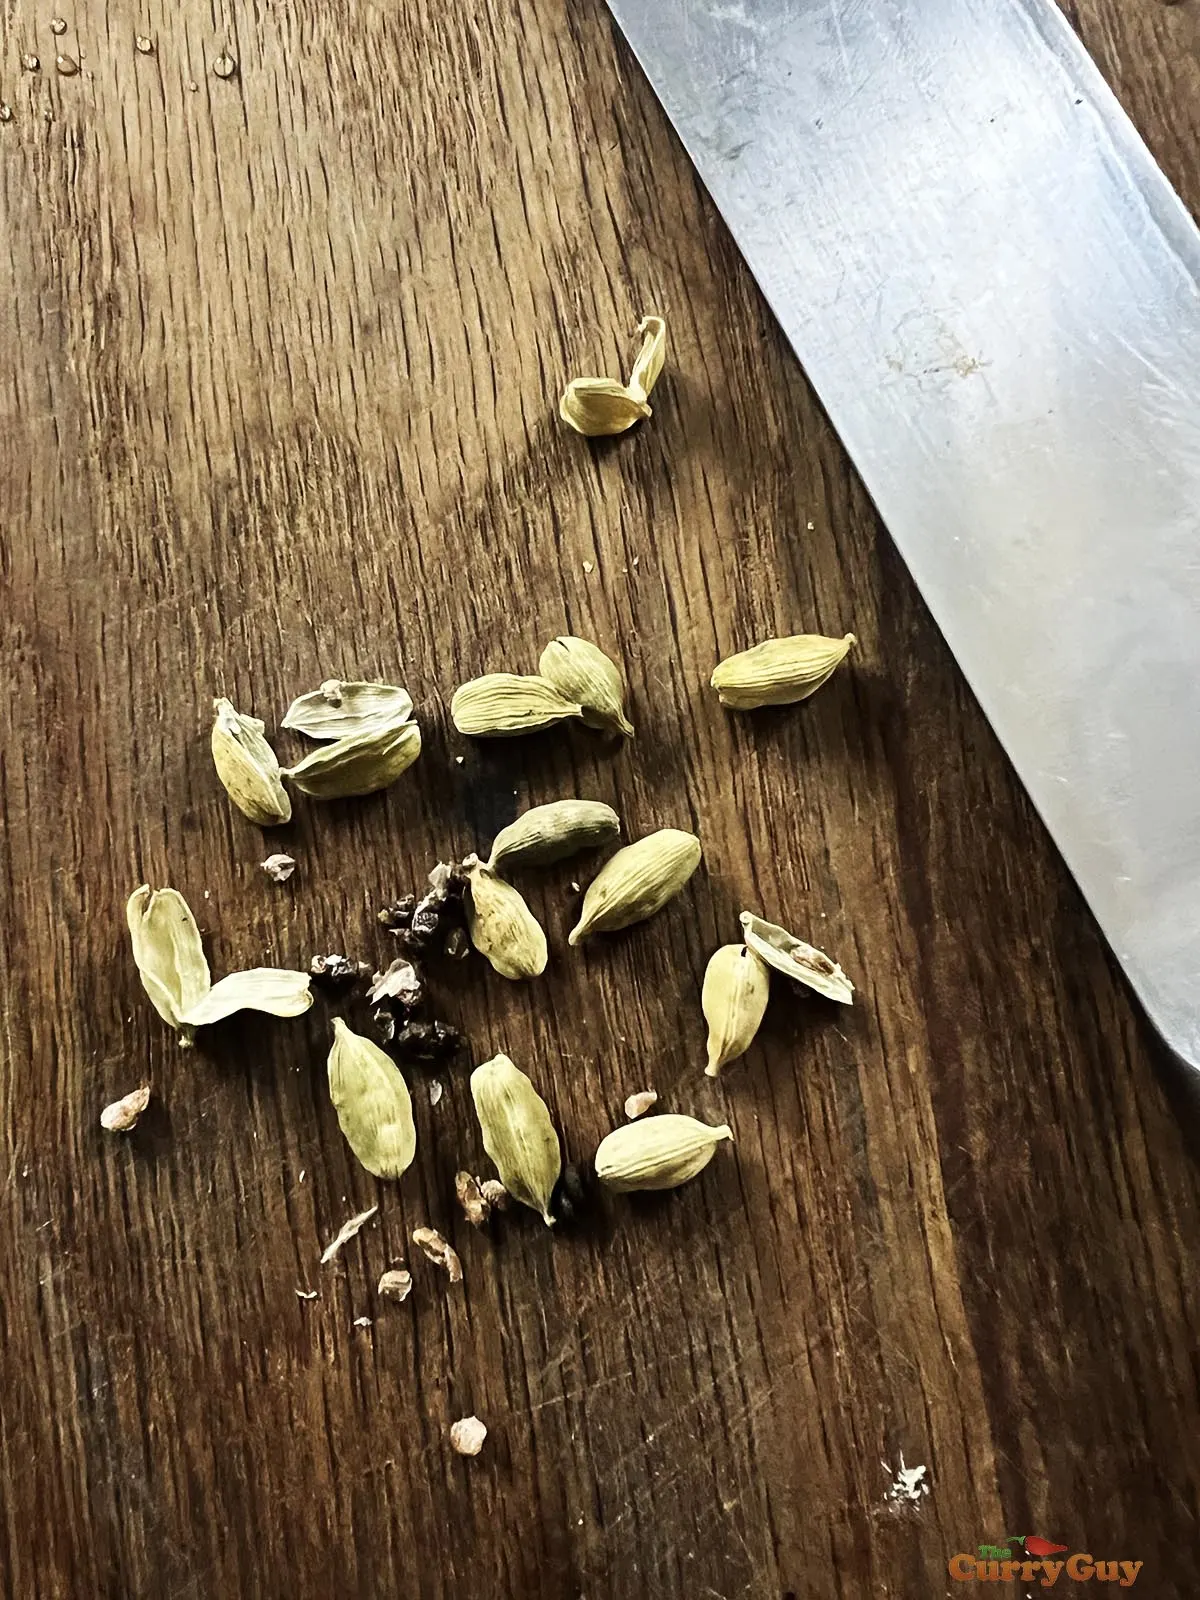 Removing the seeds from the cardamom pods.